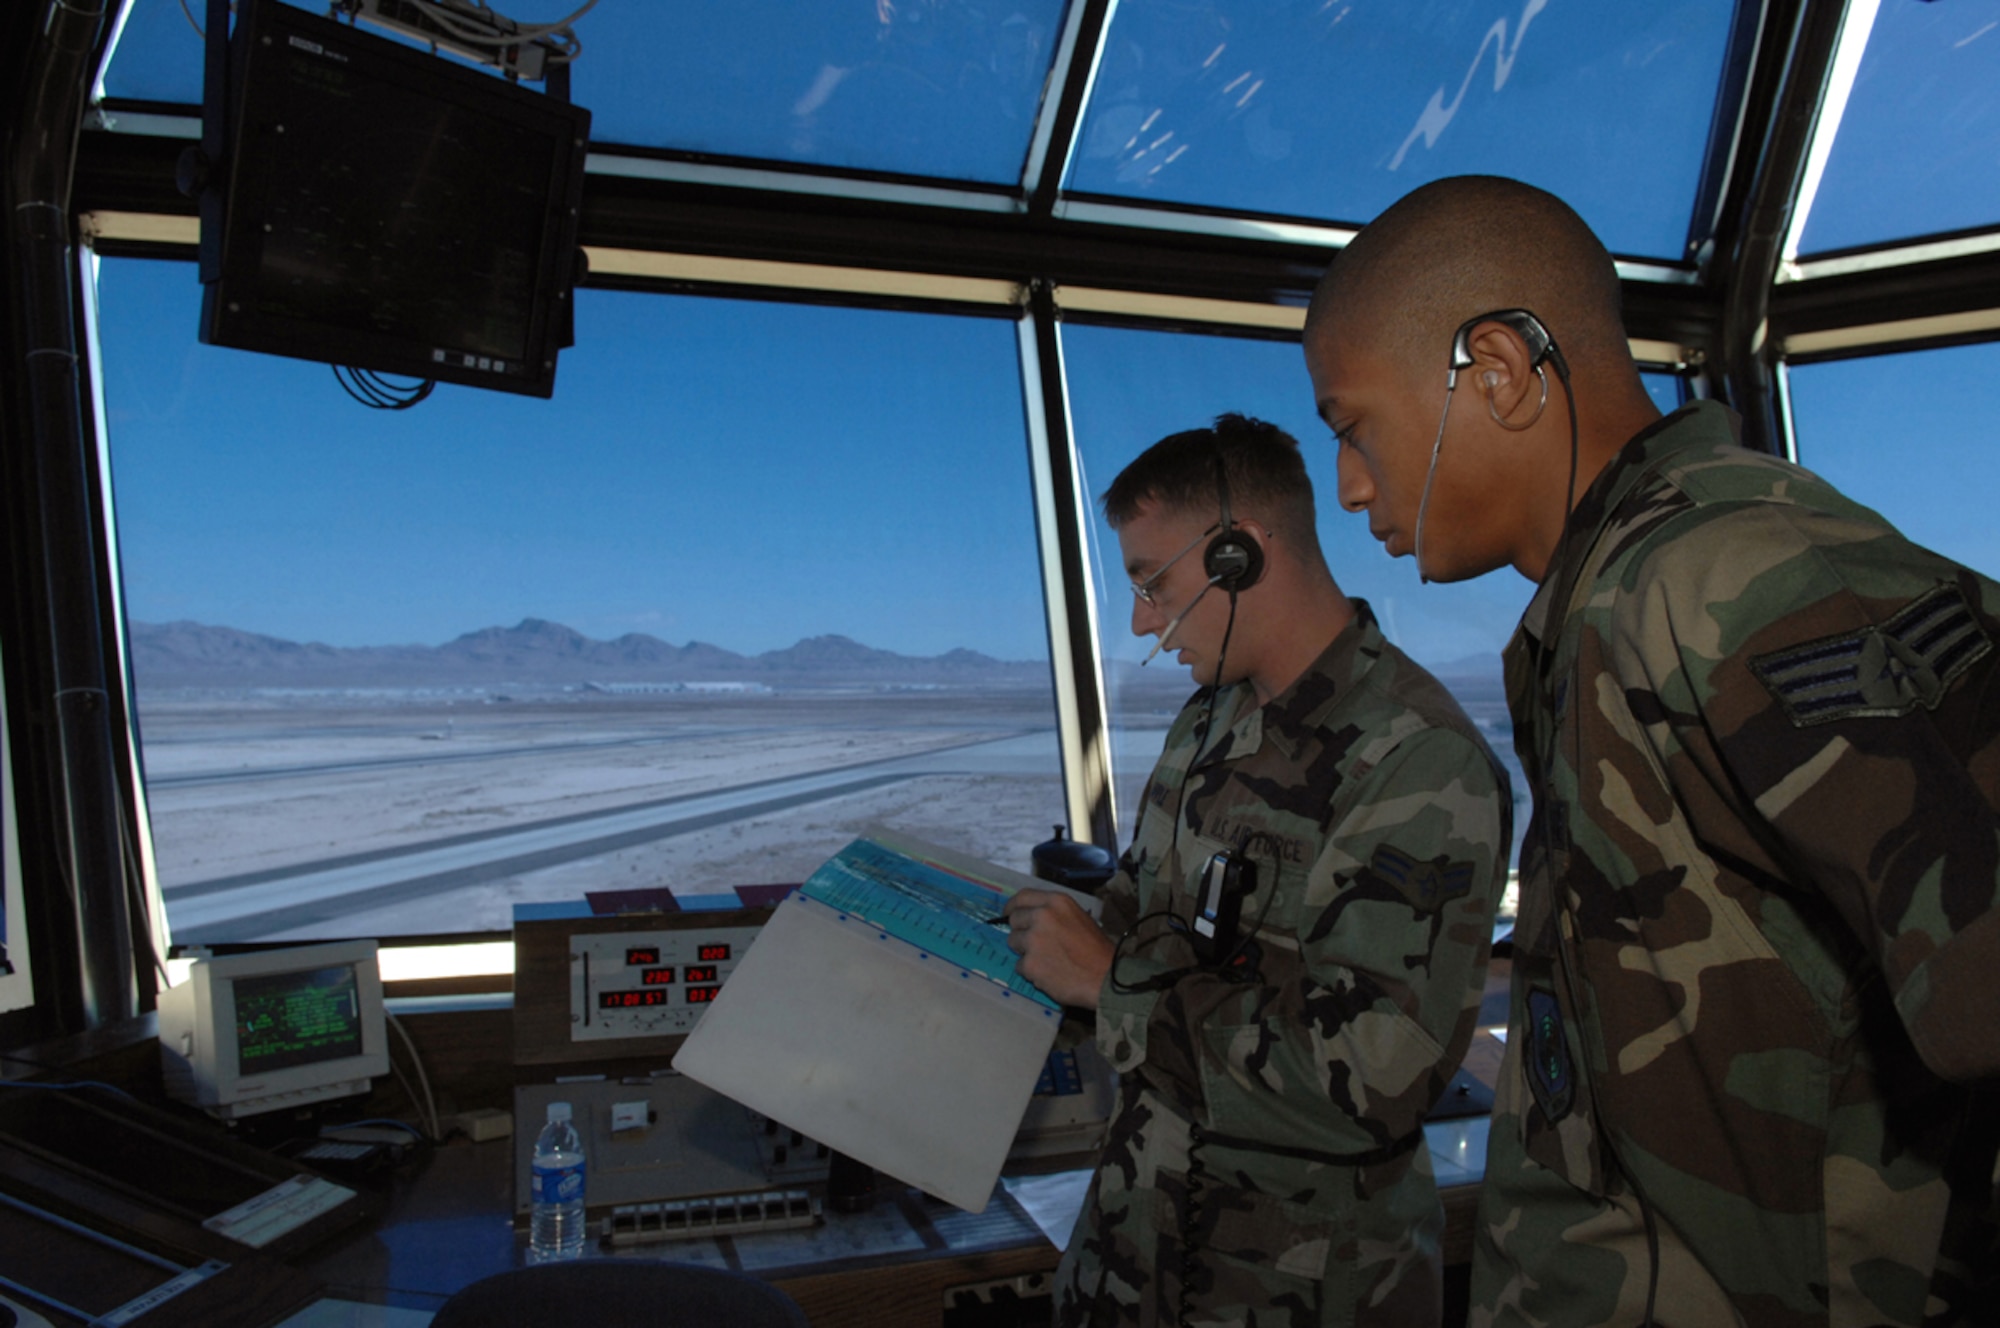 Senior Airman Lynn Jackson receives a briefing from Airman 1st Class Scott Apple in the Nellis Control Tower March 27, 2007. Airman Jackson is 'local control' position, which is responsible for runway and air space operations at Nellis Air Force Base, Nev. (U.S. Air Force photo/Airman 1st Class Kasabyan McGarvey)